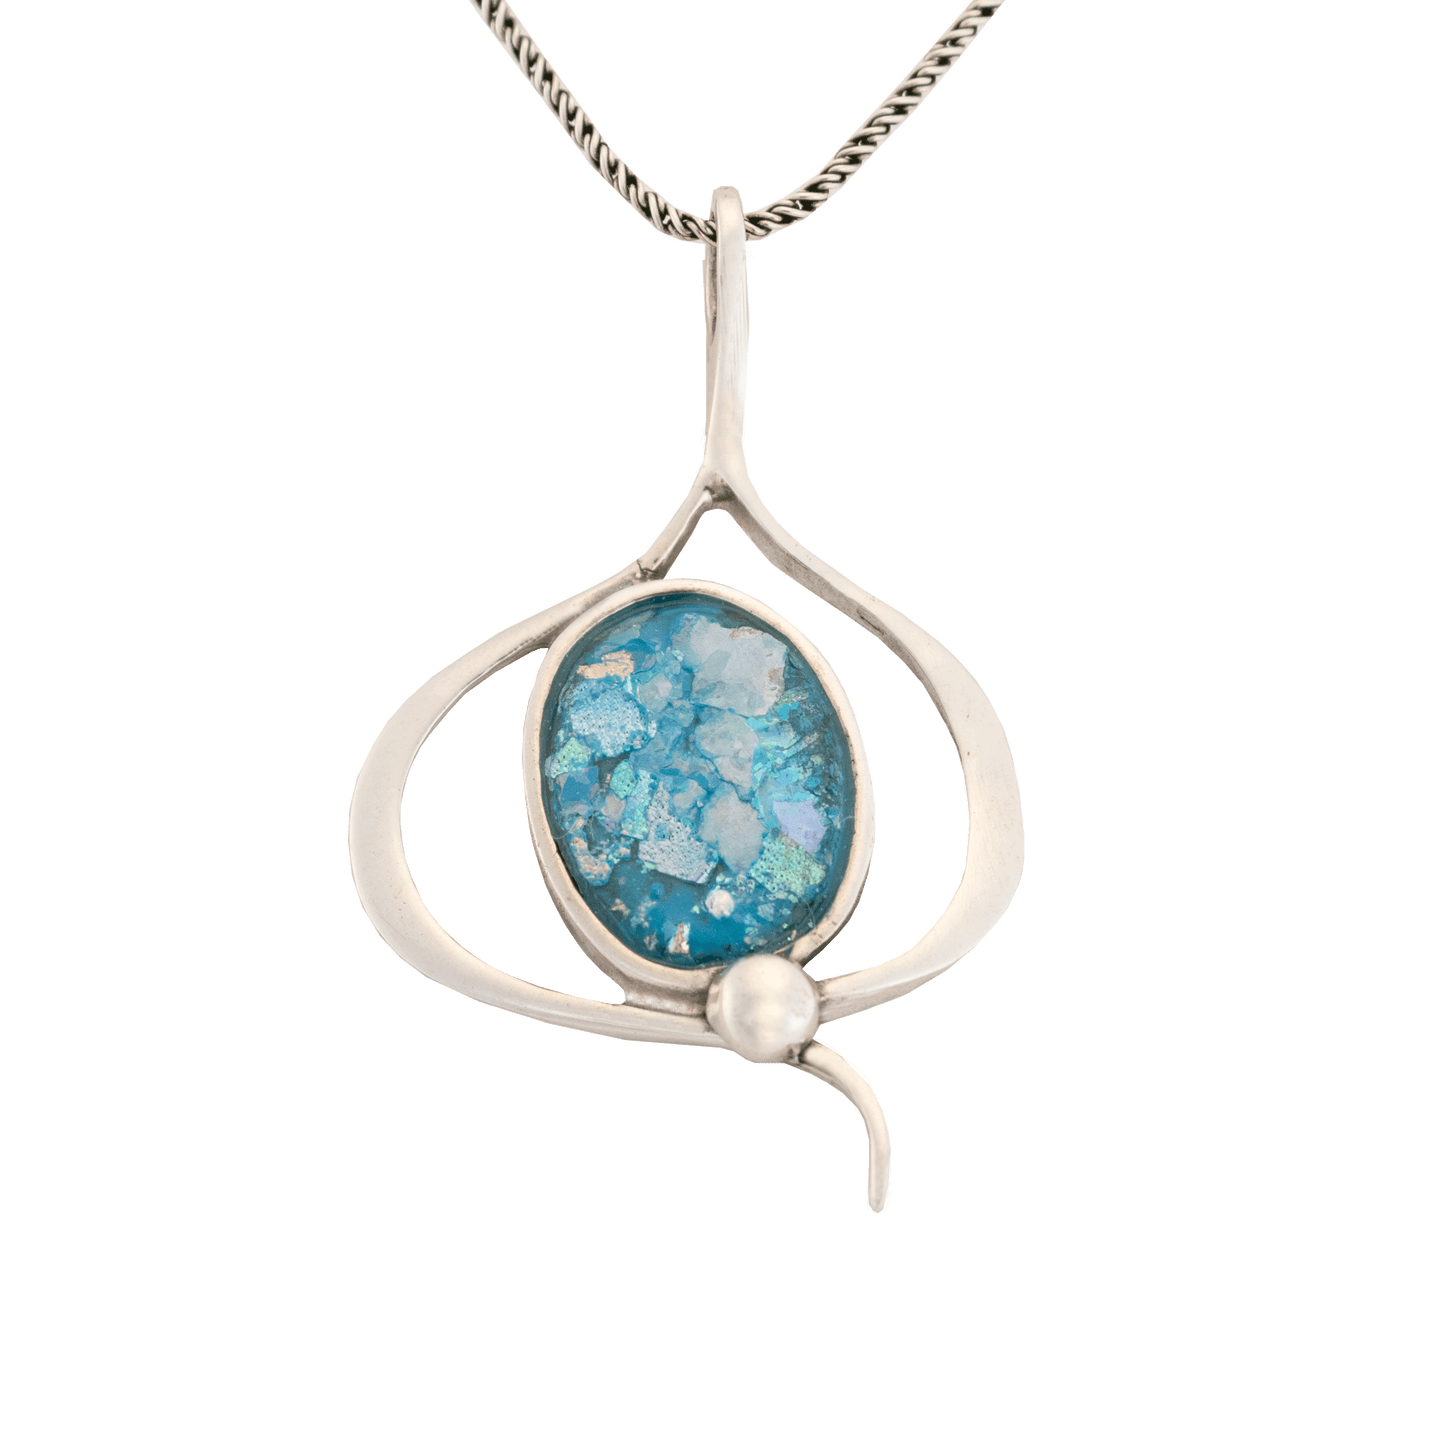 Roman Glass Oval Necklace with Silver Swirl